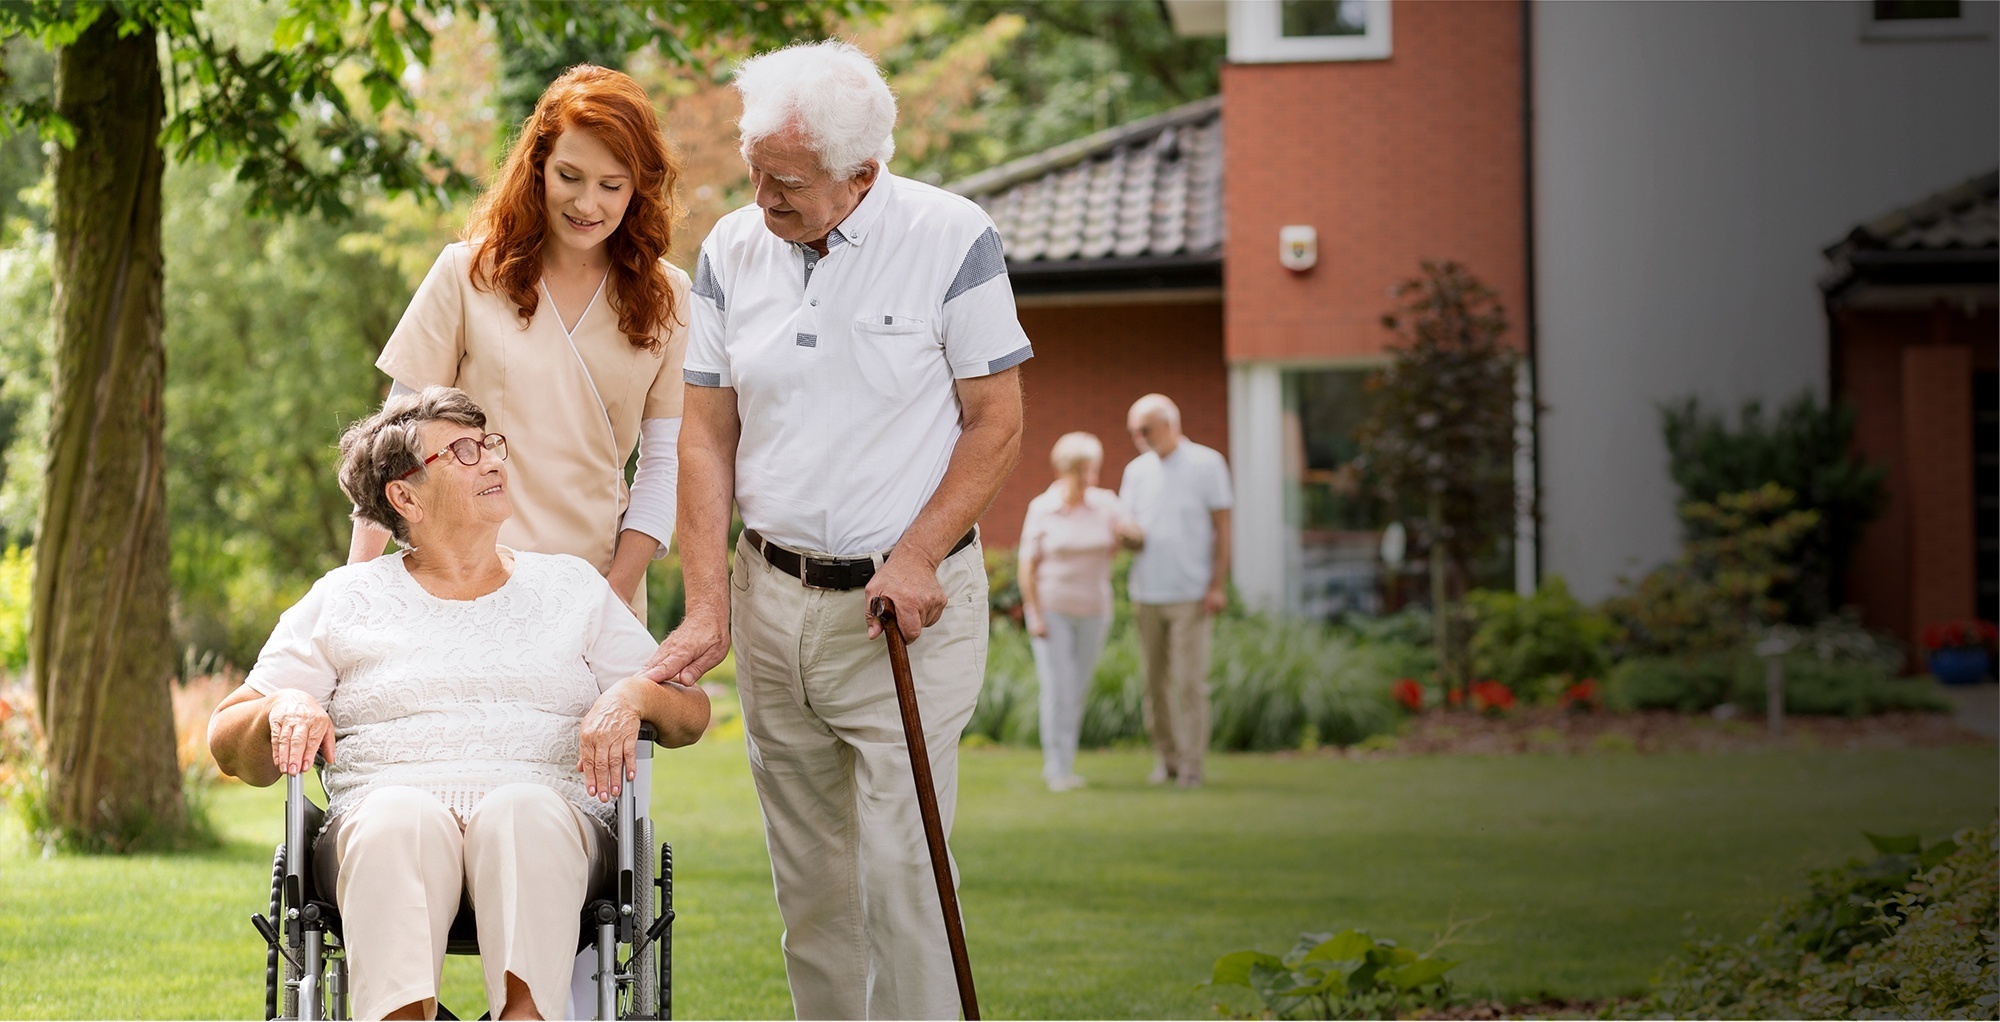 Get the support you need to live comfortably in your own home with Home Health Care Agency in Fort Walton Beach